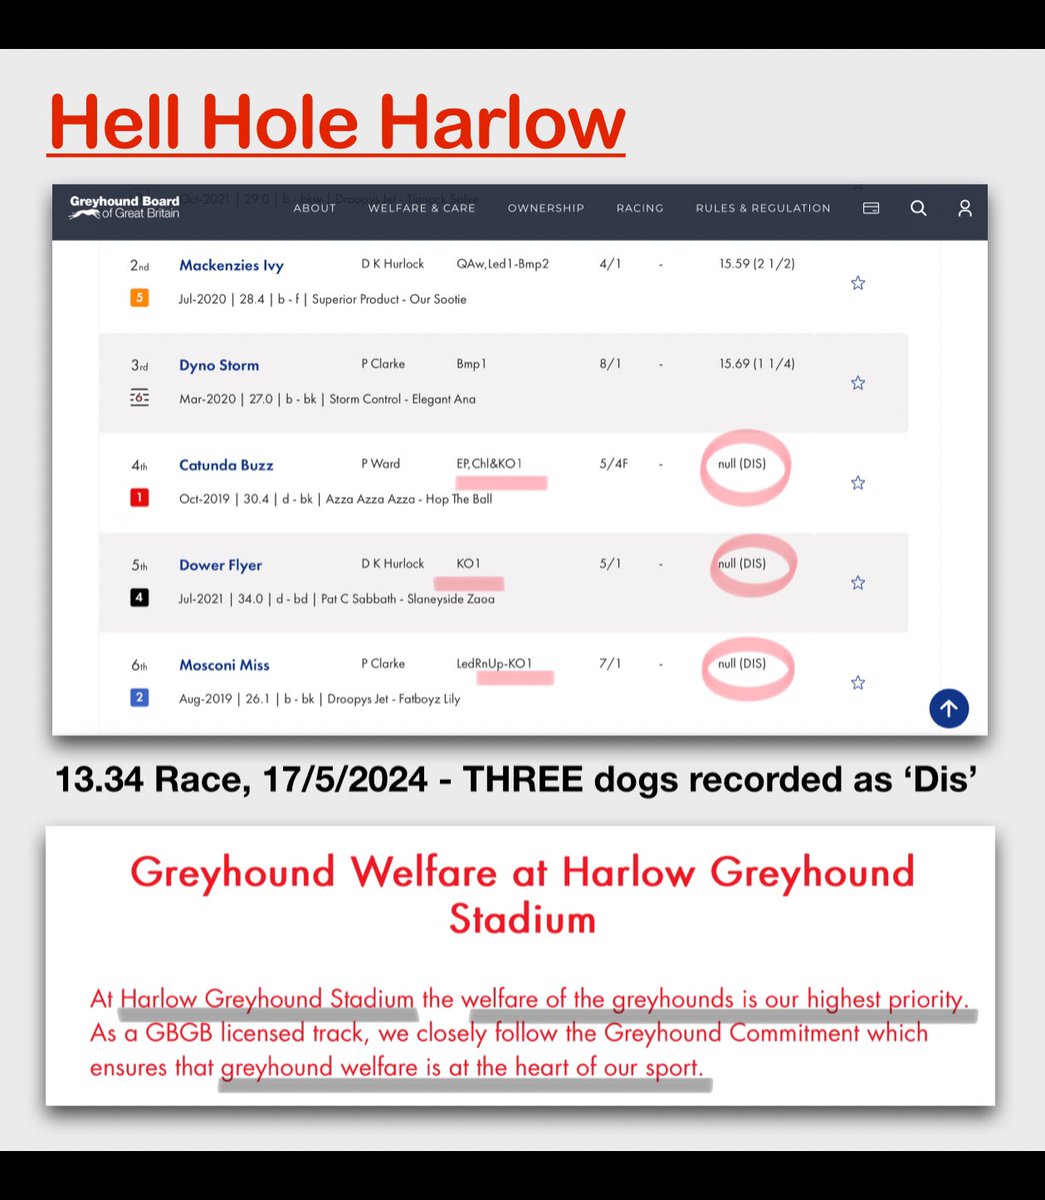 Do they honestly think we will believe their claims? If they really cared, there would be NO greyhound racing. Is this vile industry something we really want in 2024? #bangreyhoundracing #animalcruelty #AnimalAbuse #cutthechase #roberthalfonmp